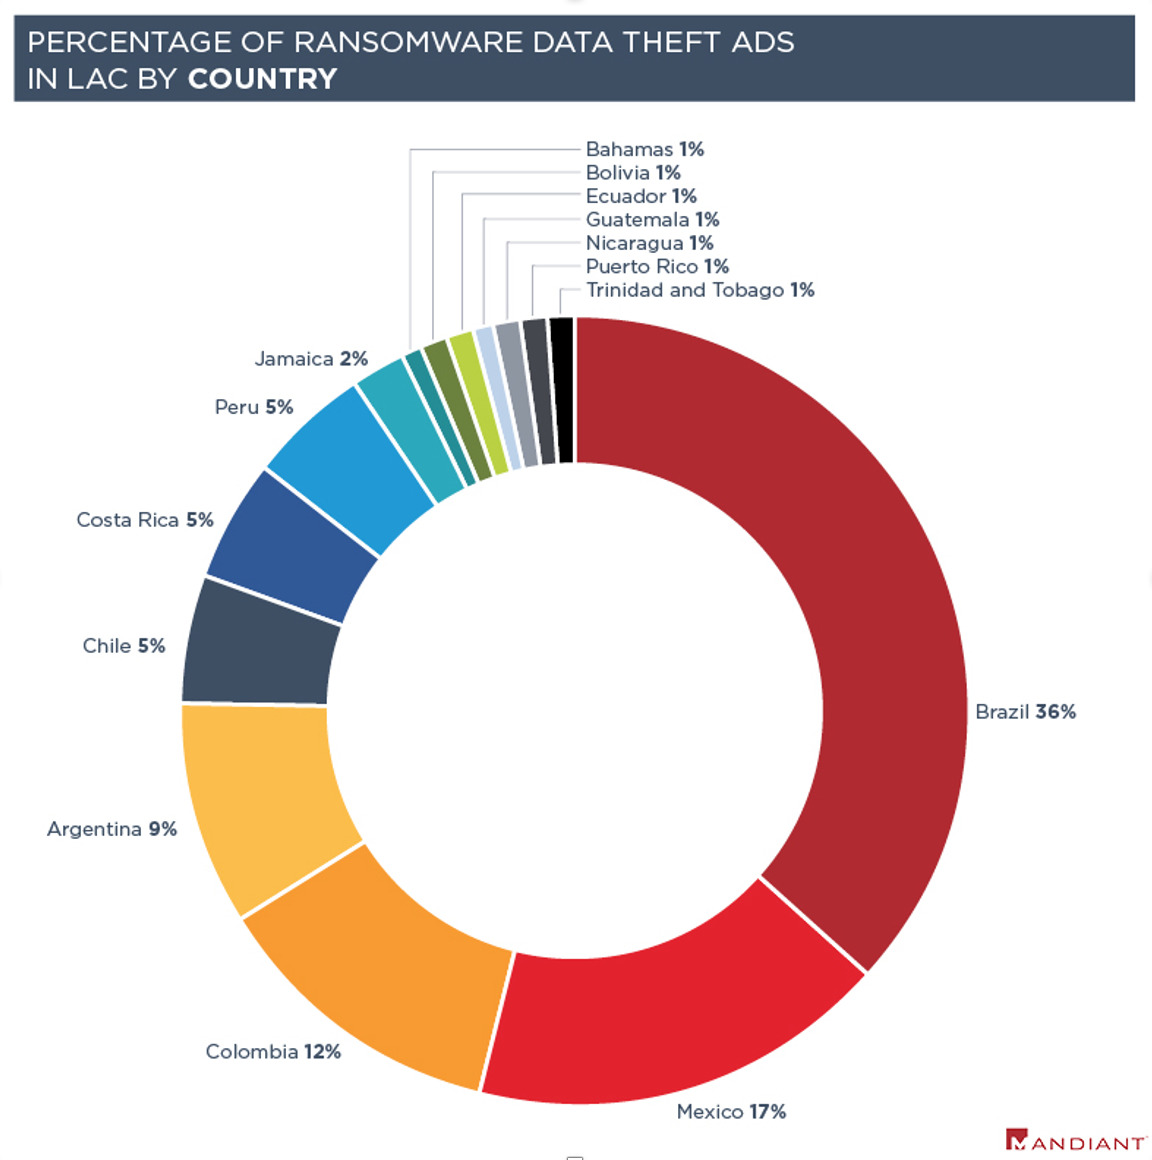 Percentage of ransomware data theft advertisements in LAC by country